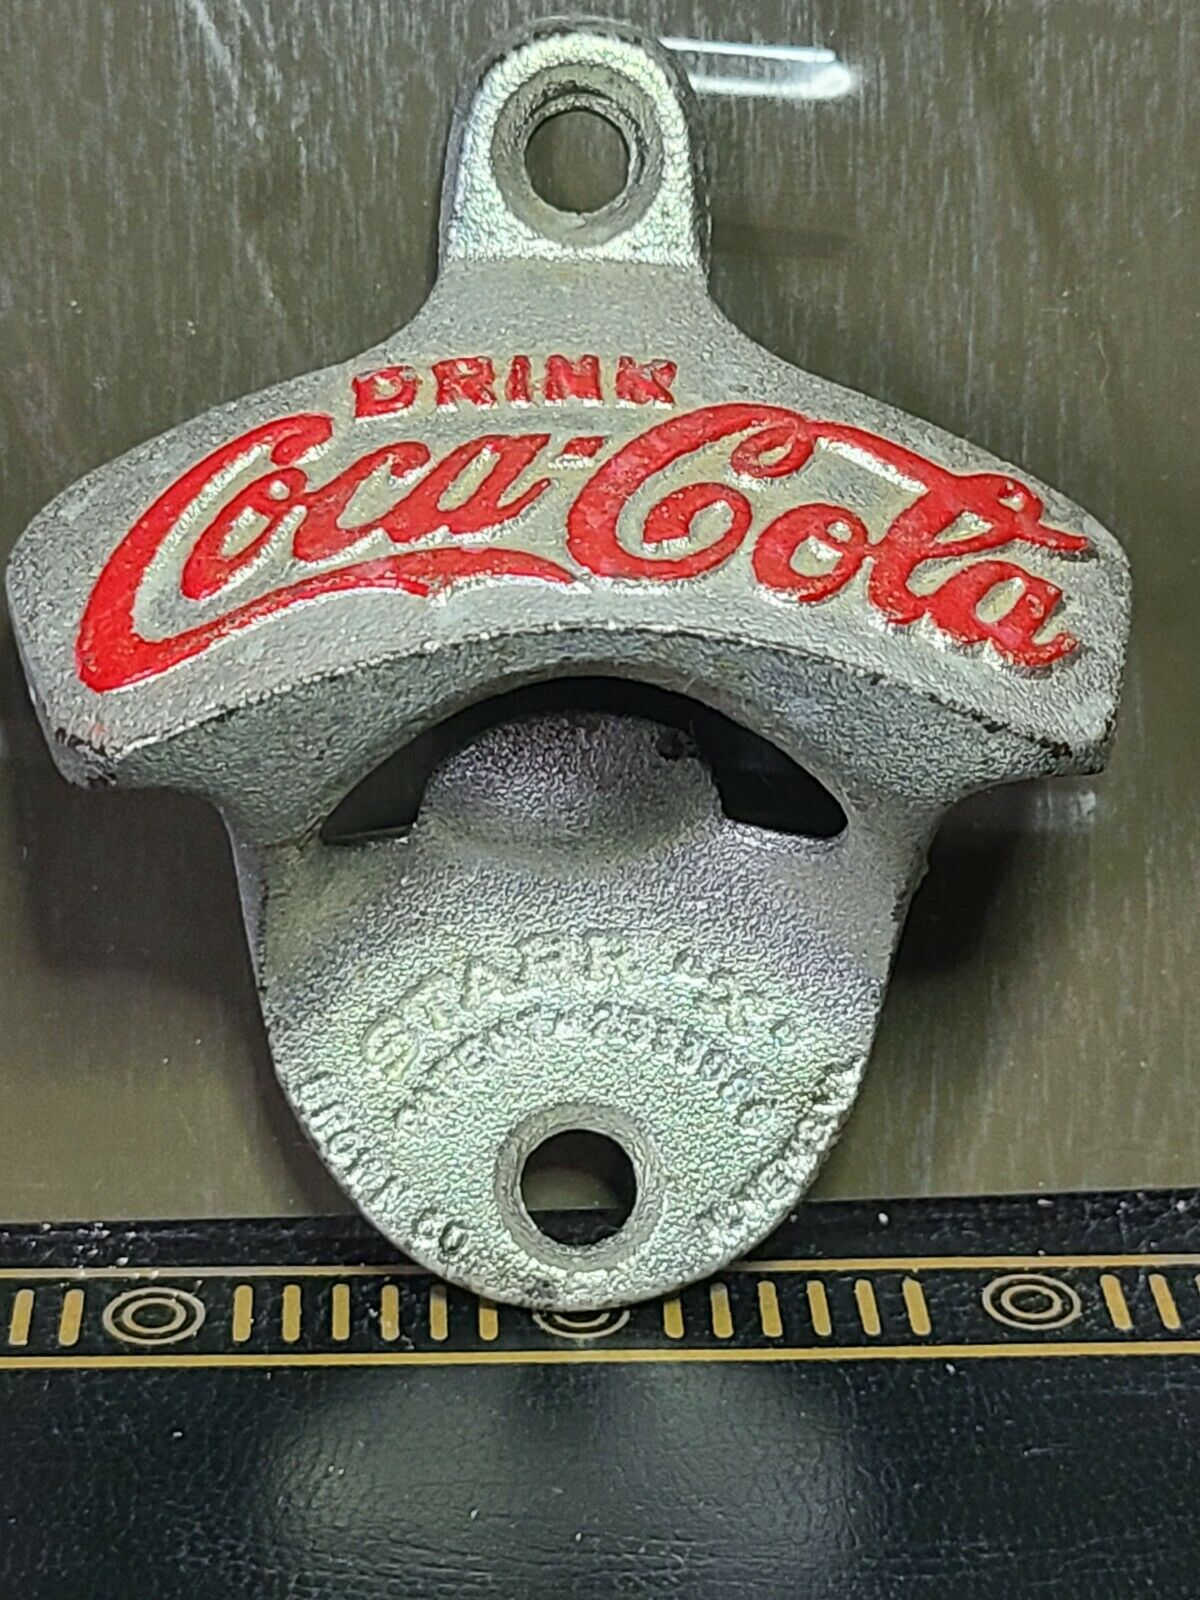 Vintage Coca-cola Starr "x" Cast Iron Wall Mount Bottle Opener Made In W.germany